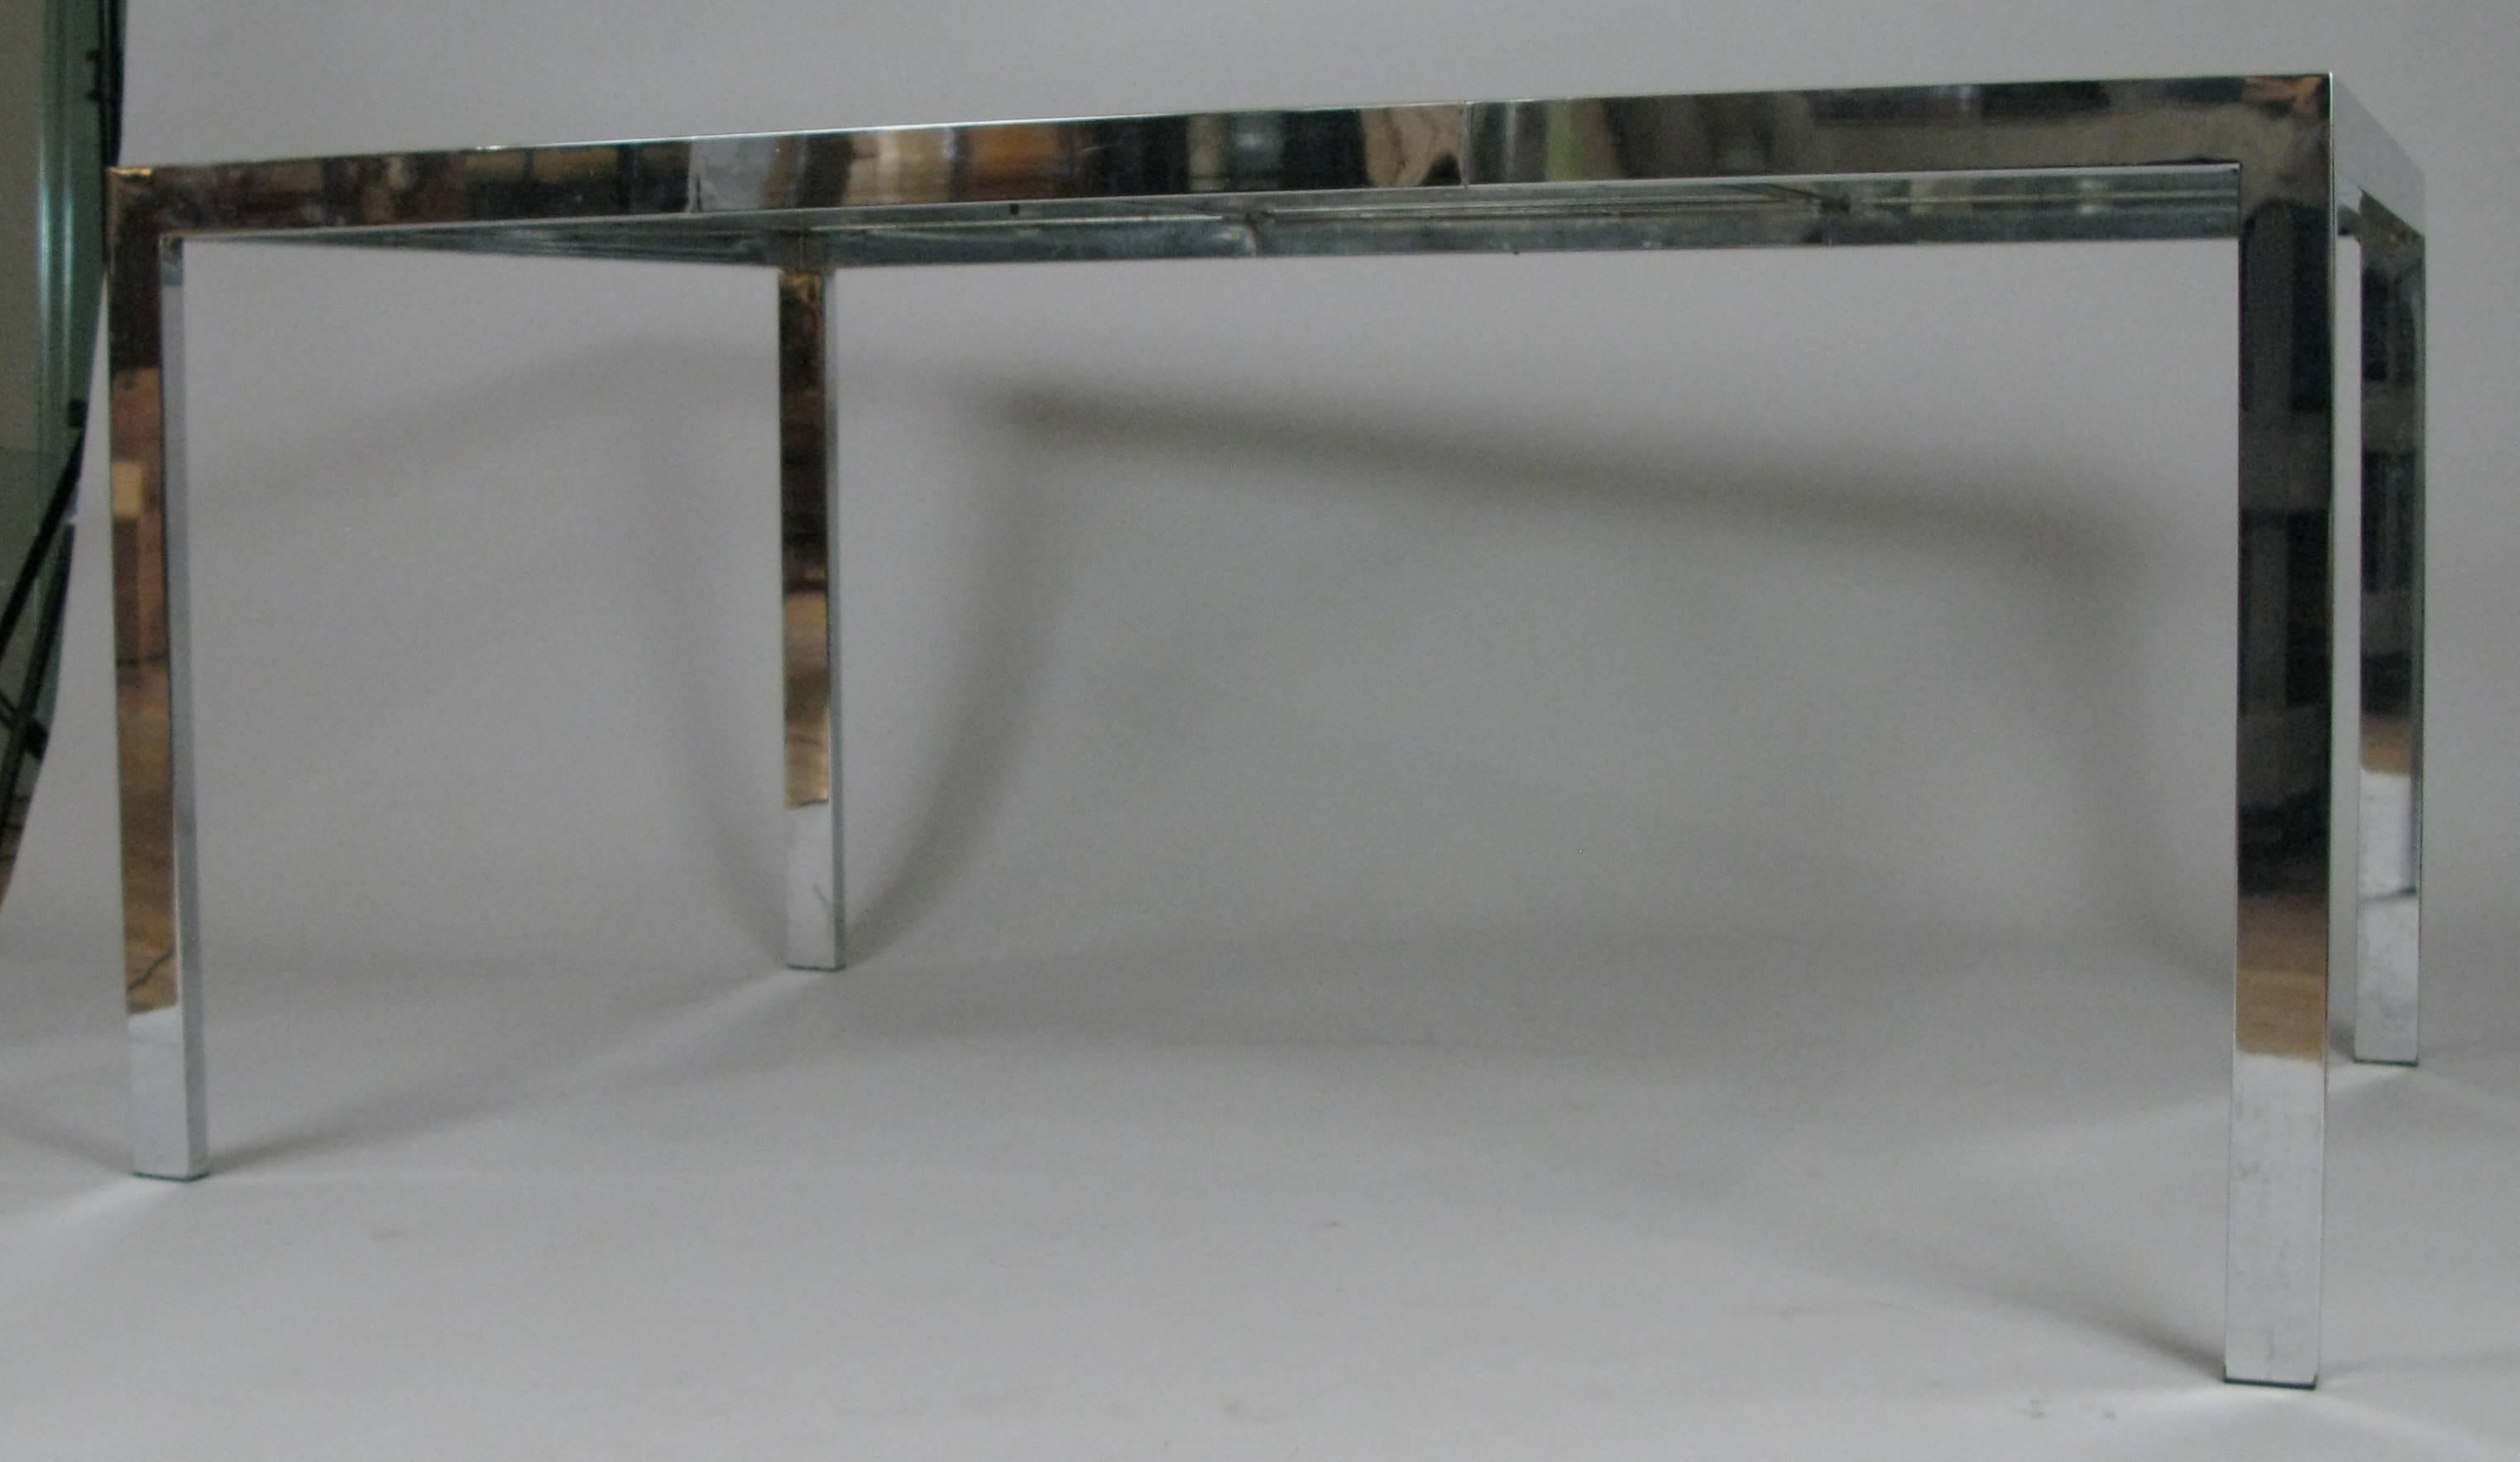 A beautiful vintage 1970s extension dining table with a chromed steel frame and glass top with chrome frame as well. The table starts out as a square and slides apart to accommodate a glass leaf with the same chrome trim. Very nice design and in